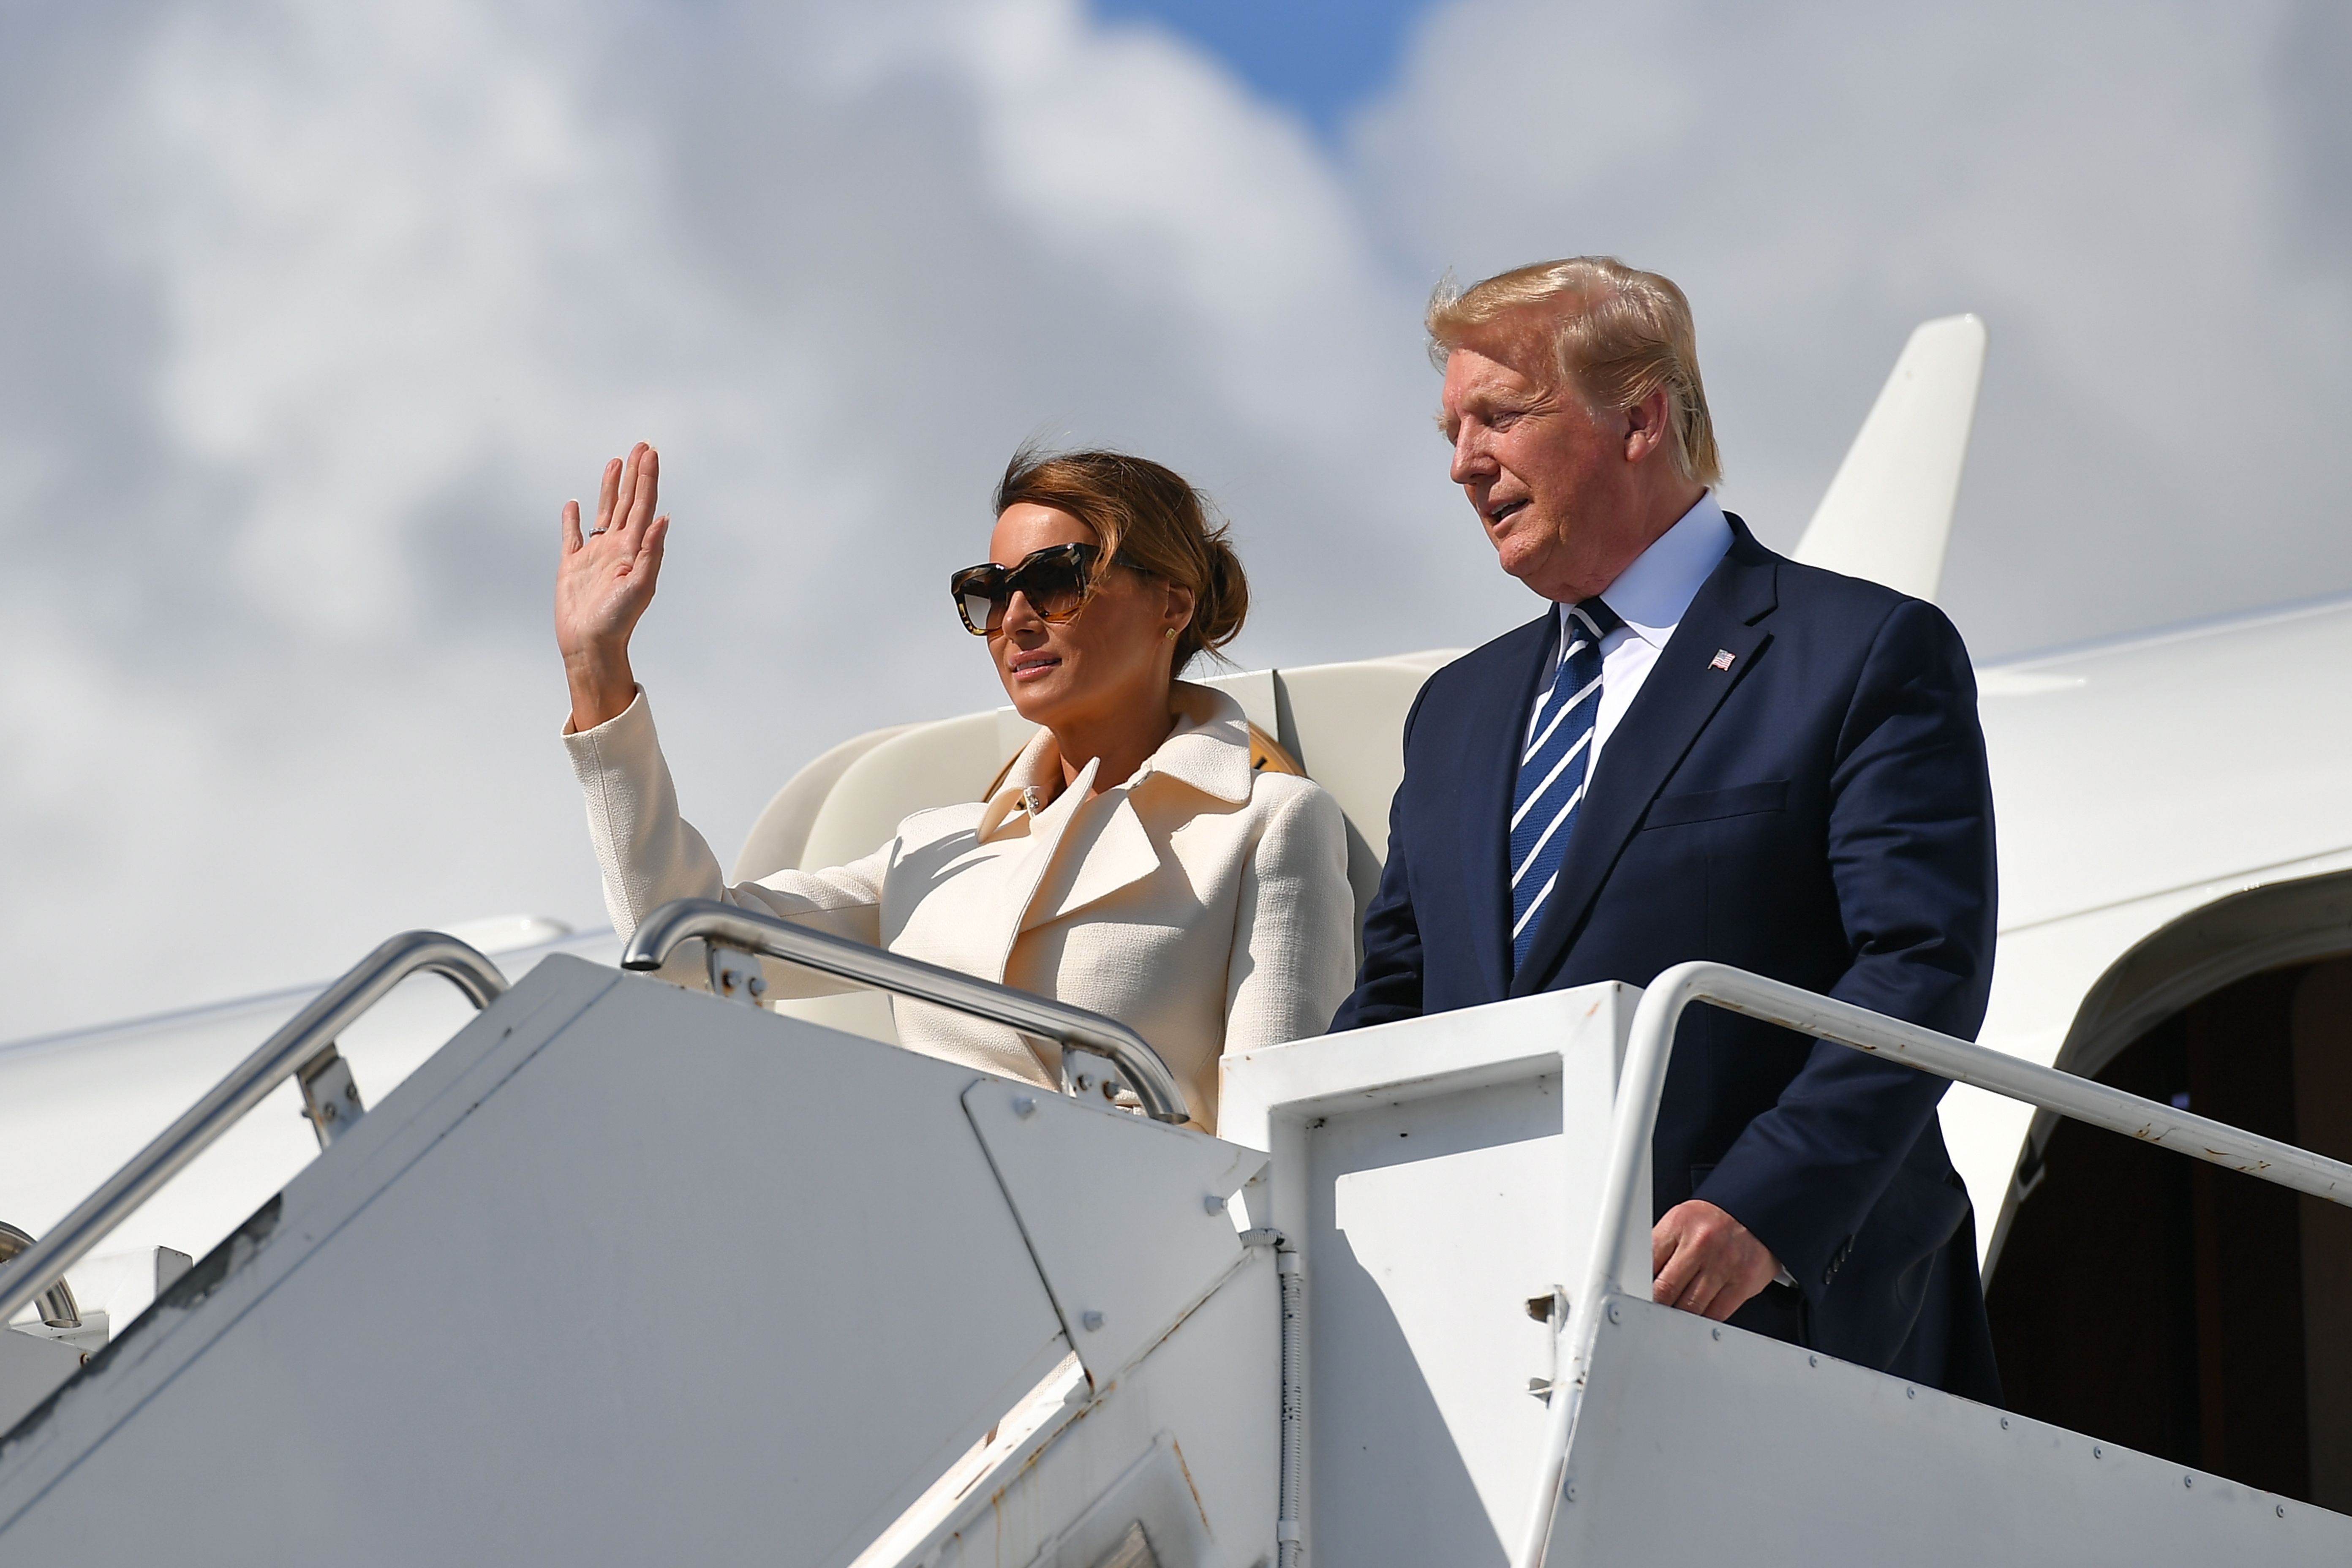 President Trump (R) and first lady Melania Trump (L) disembark Air Force One upon arrival at Shannon Airport in Shannon, Ireland on June 5, 2019.